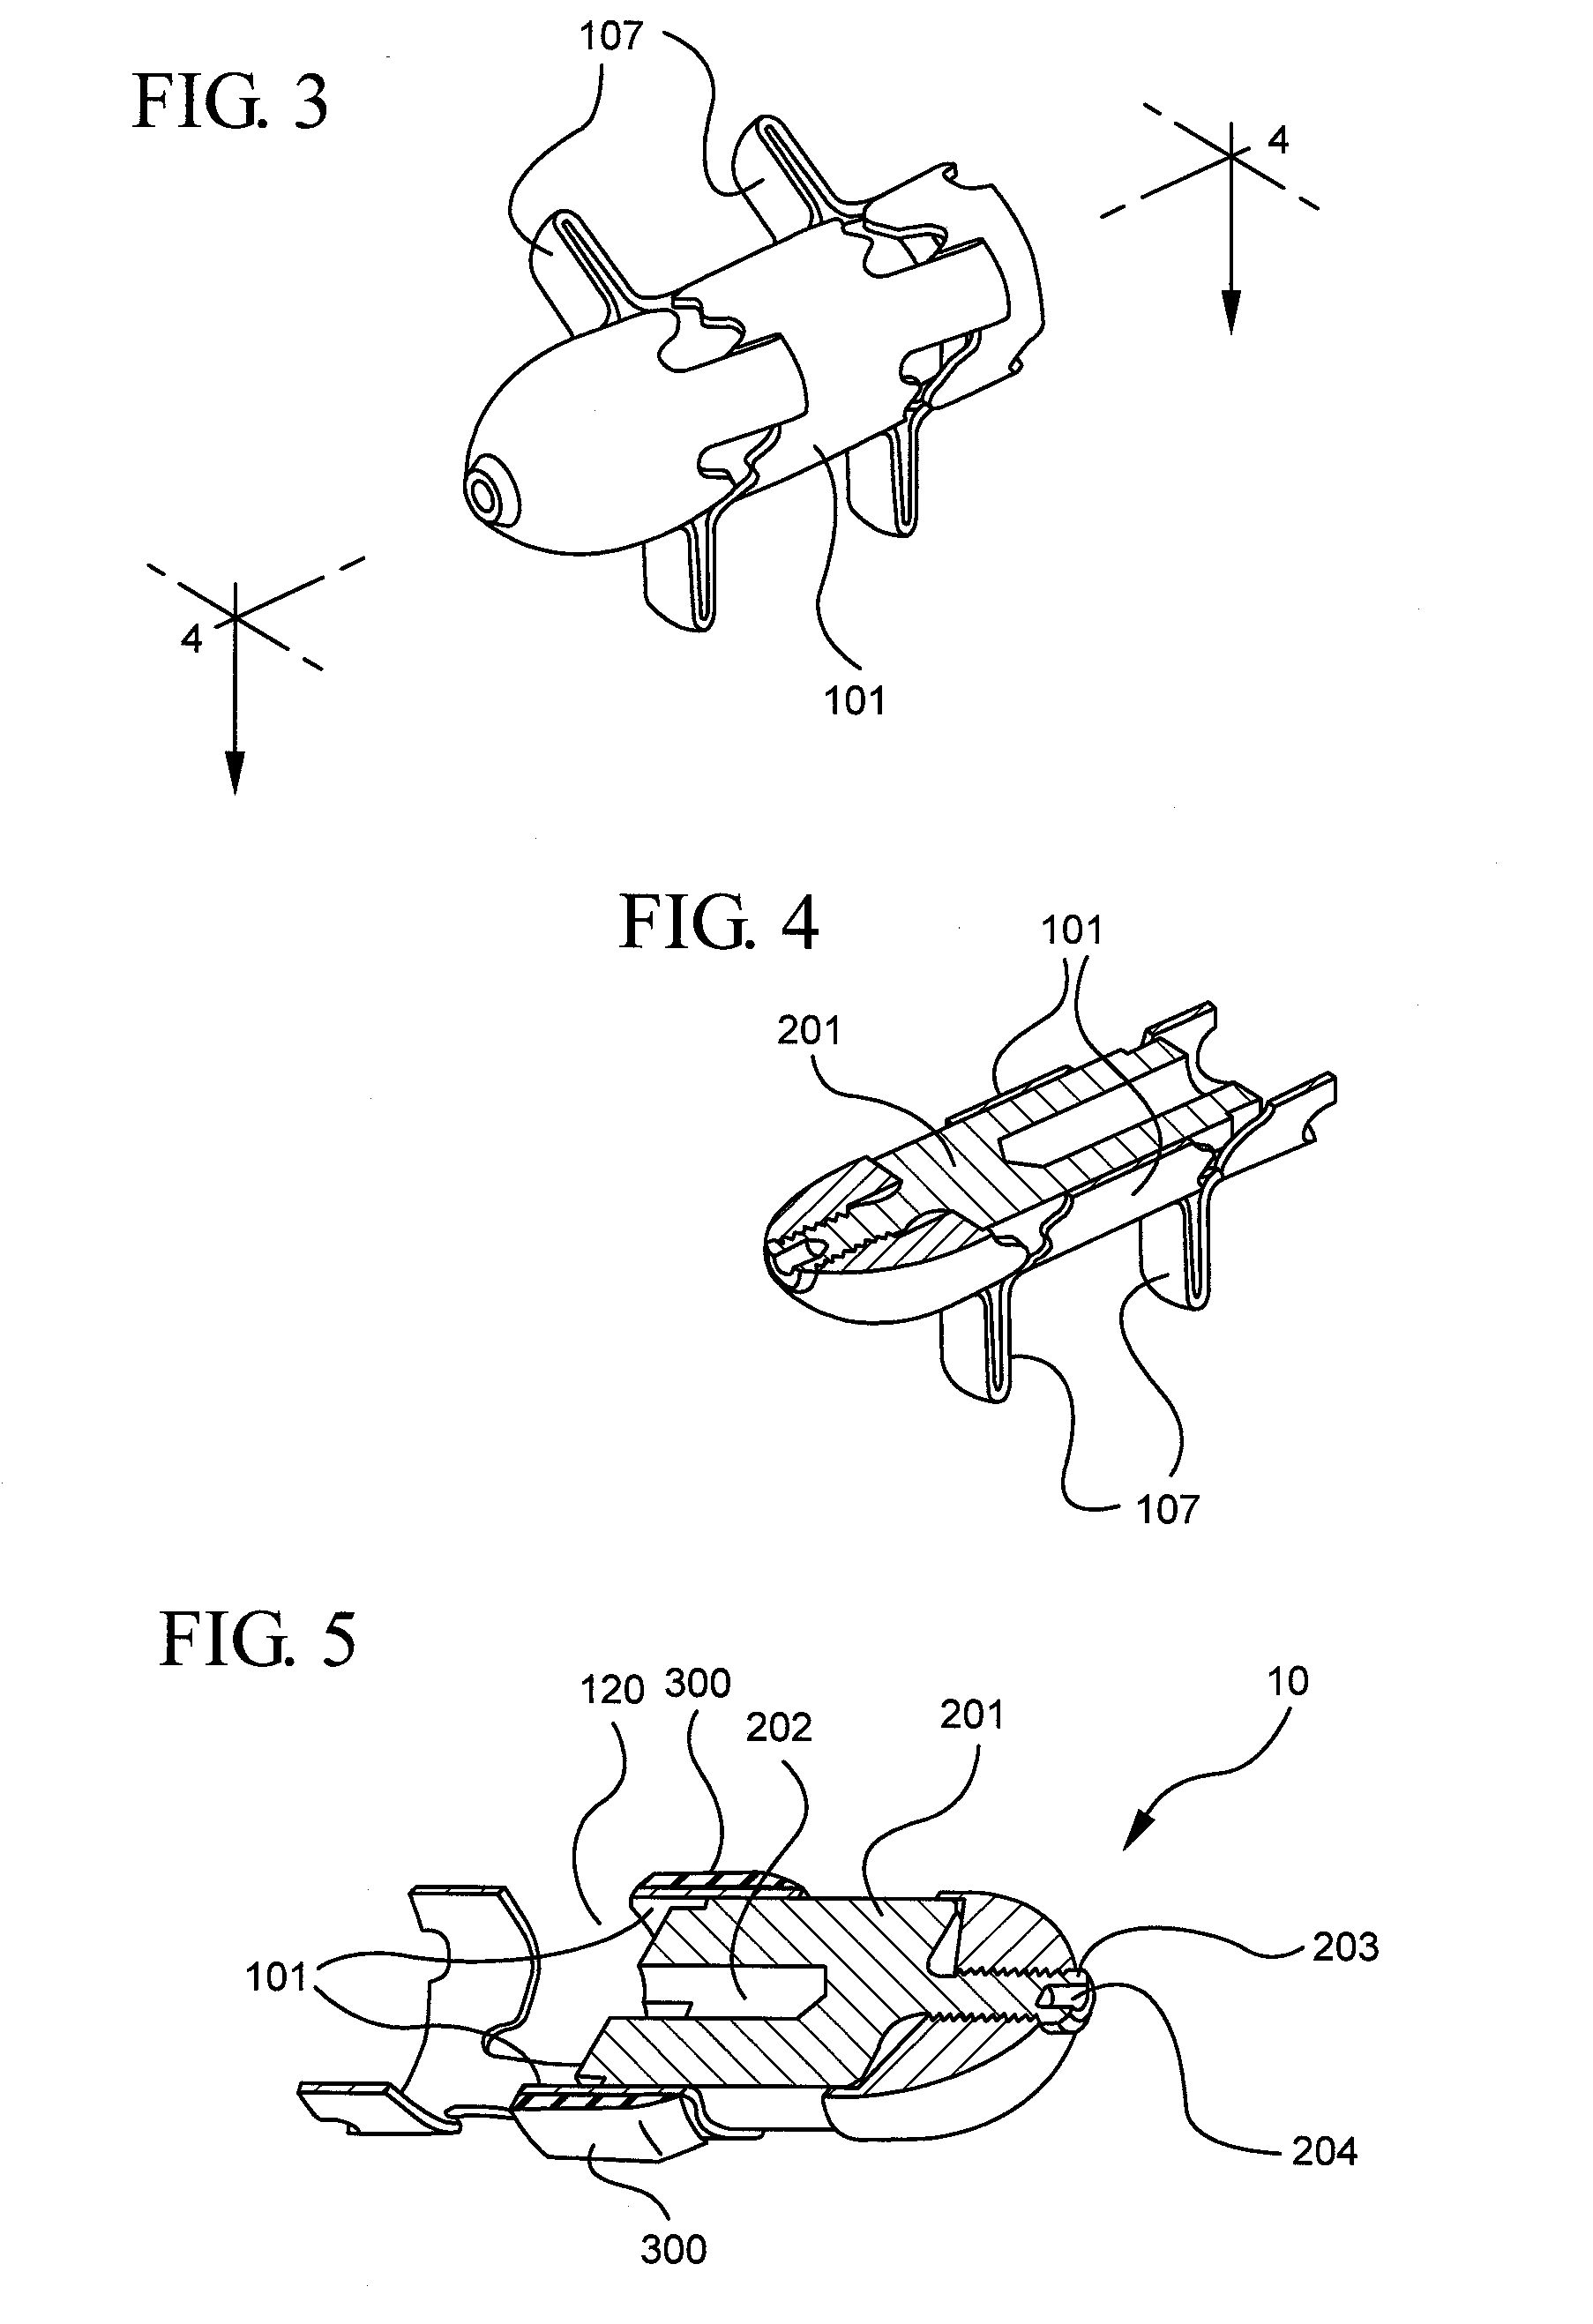 Interspinous process implant having a compliant spacer